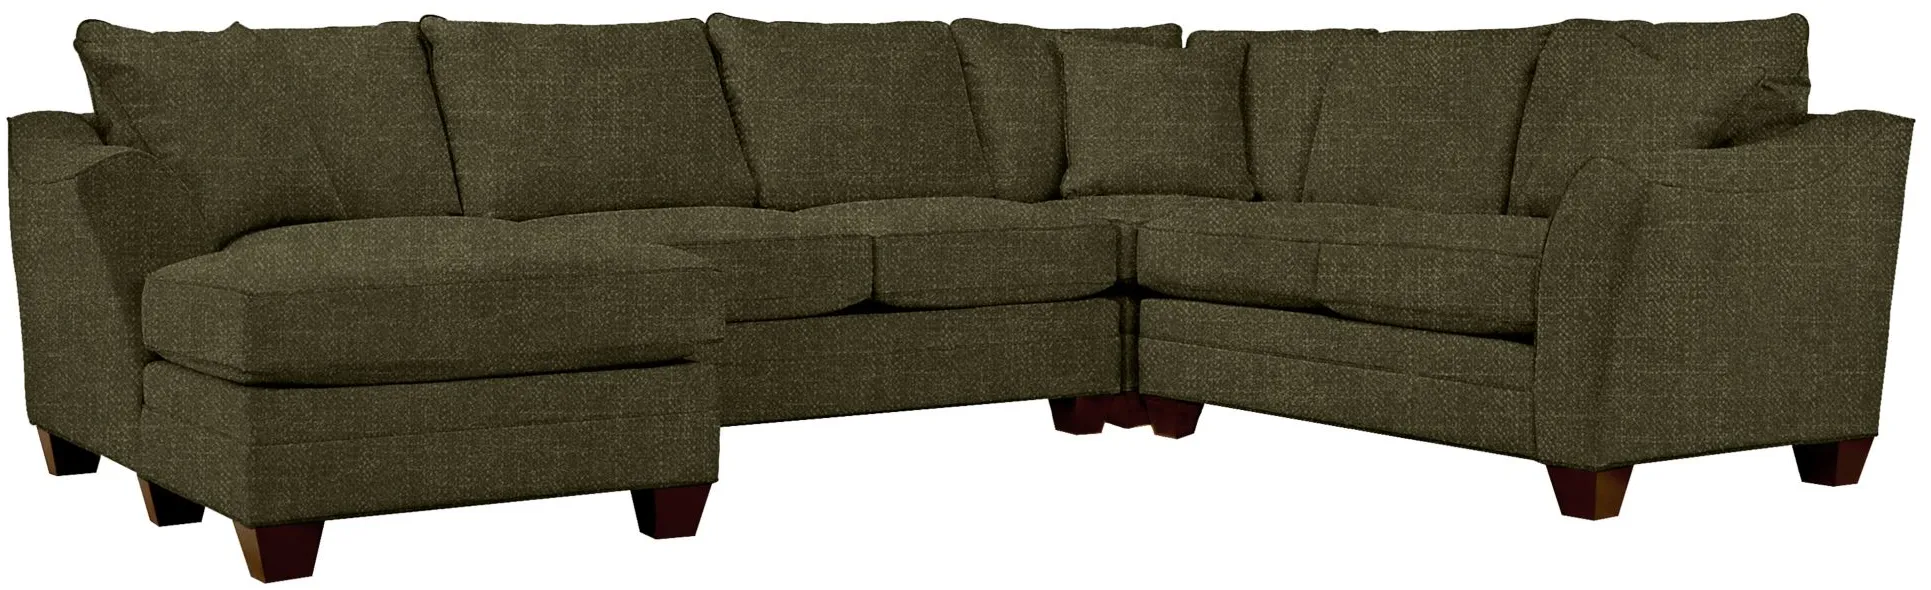 Foresthill 4-pc. Left Hand Chaise Sectional Sofa in Elliot Avocado by H.M. Richards